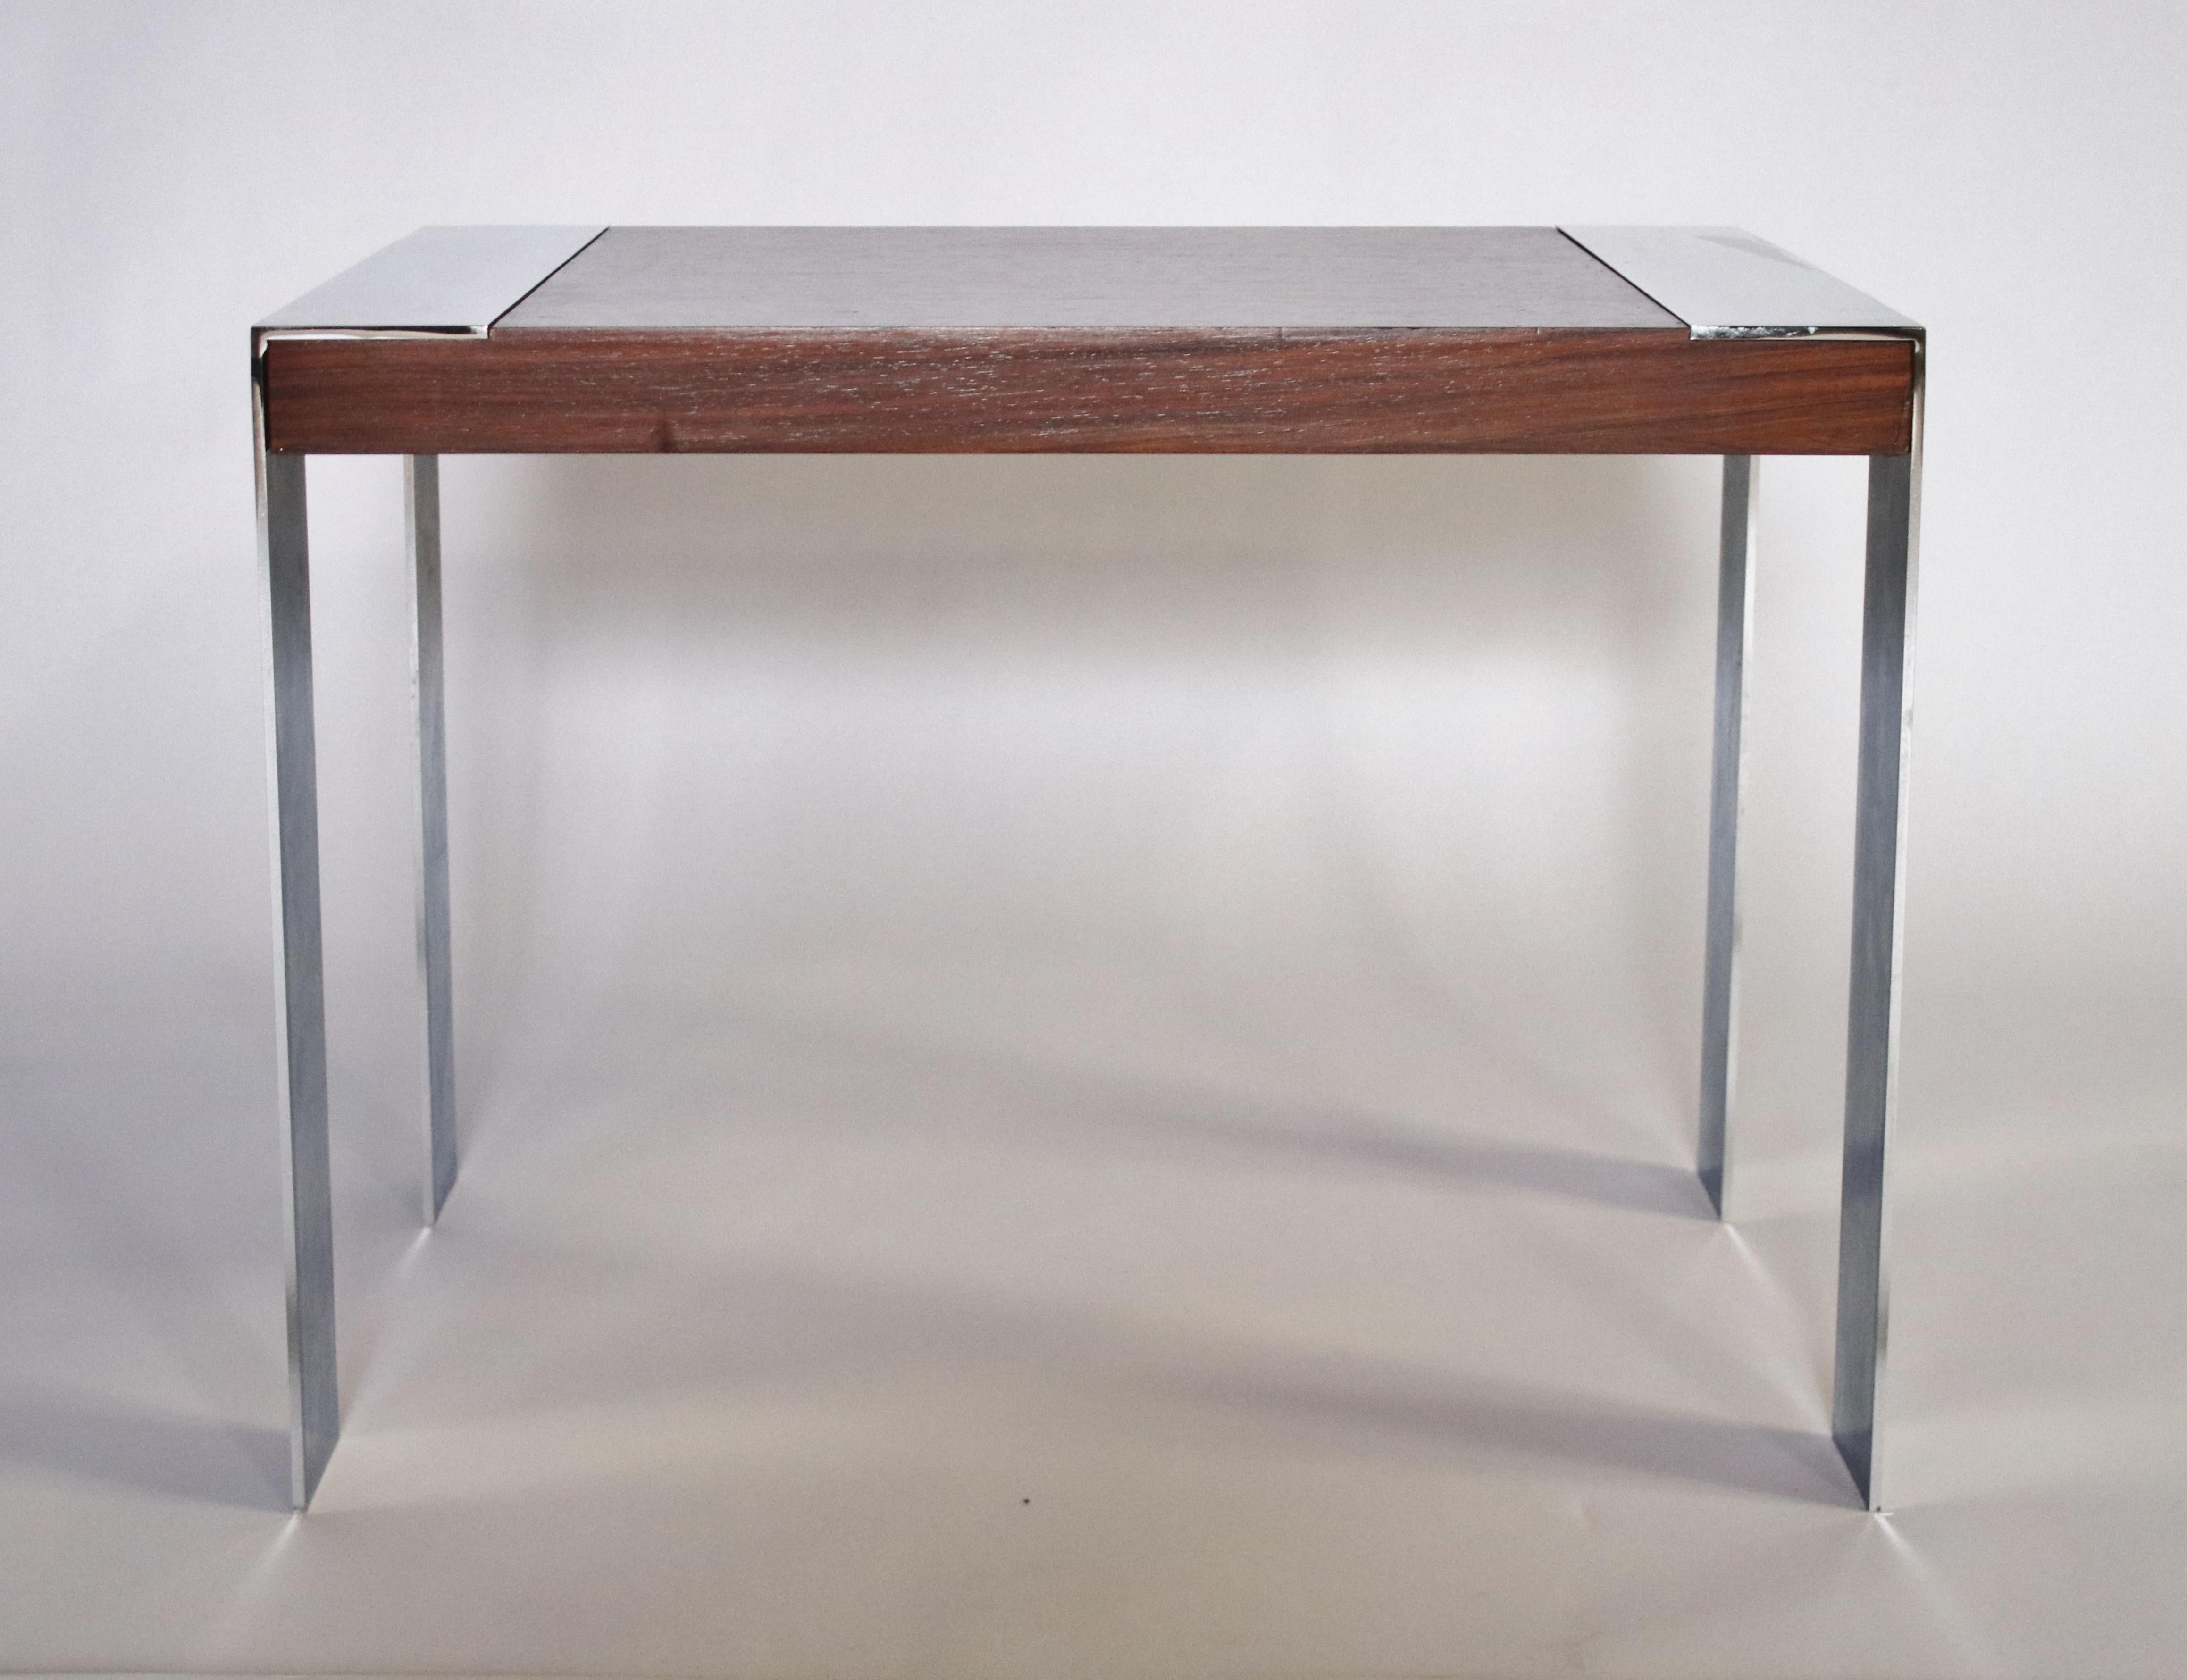 1970s Milo Baughman rosewood and polished chrome side or end table.